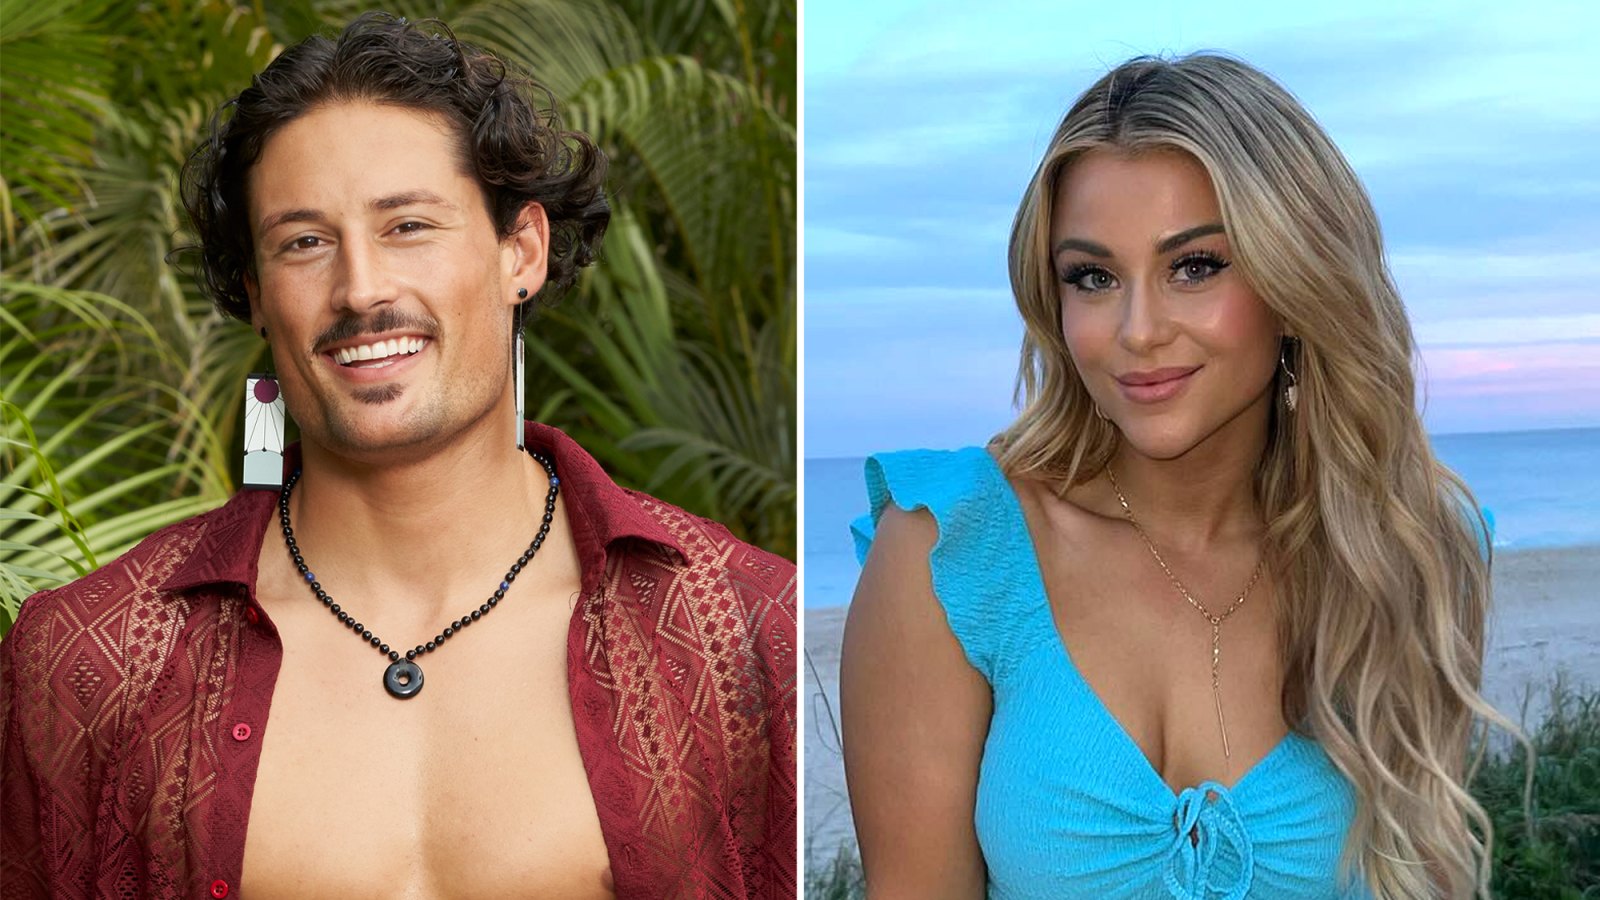 Bachelor Nation Alums Brayden Bowers and Christina Mandrell Debut Relationship During BiP Finale